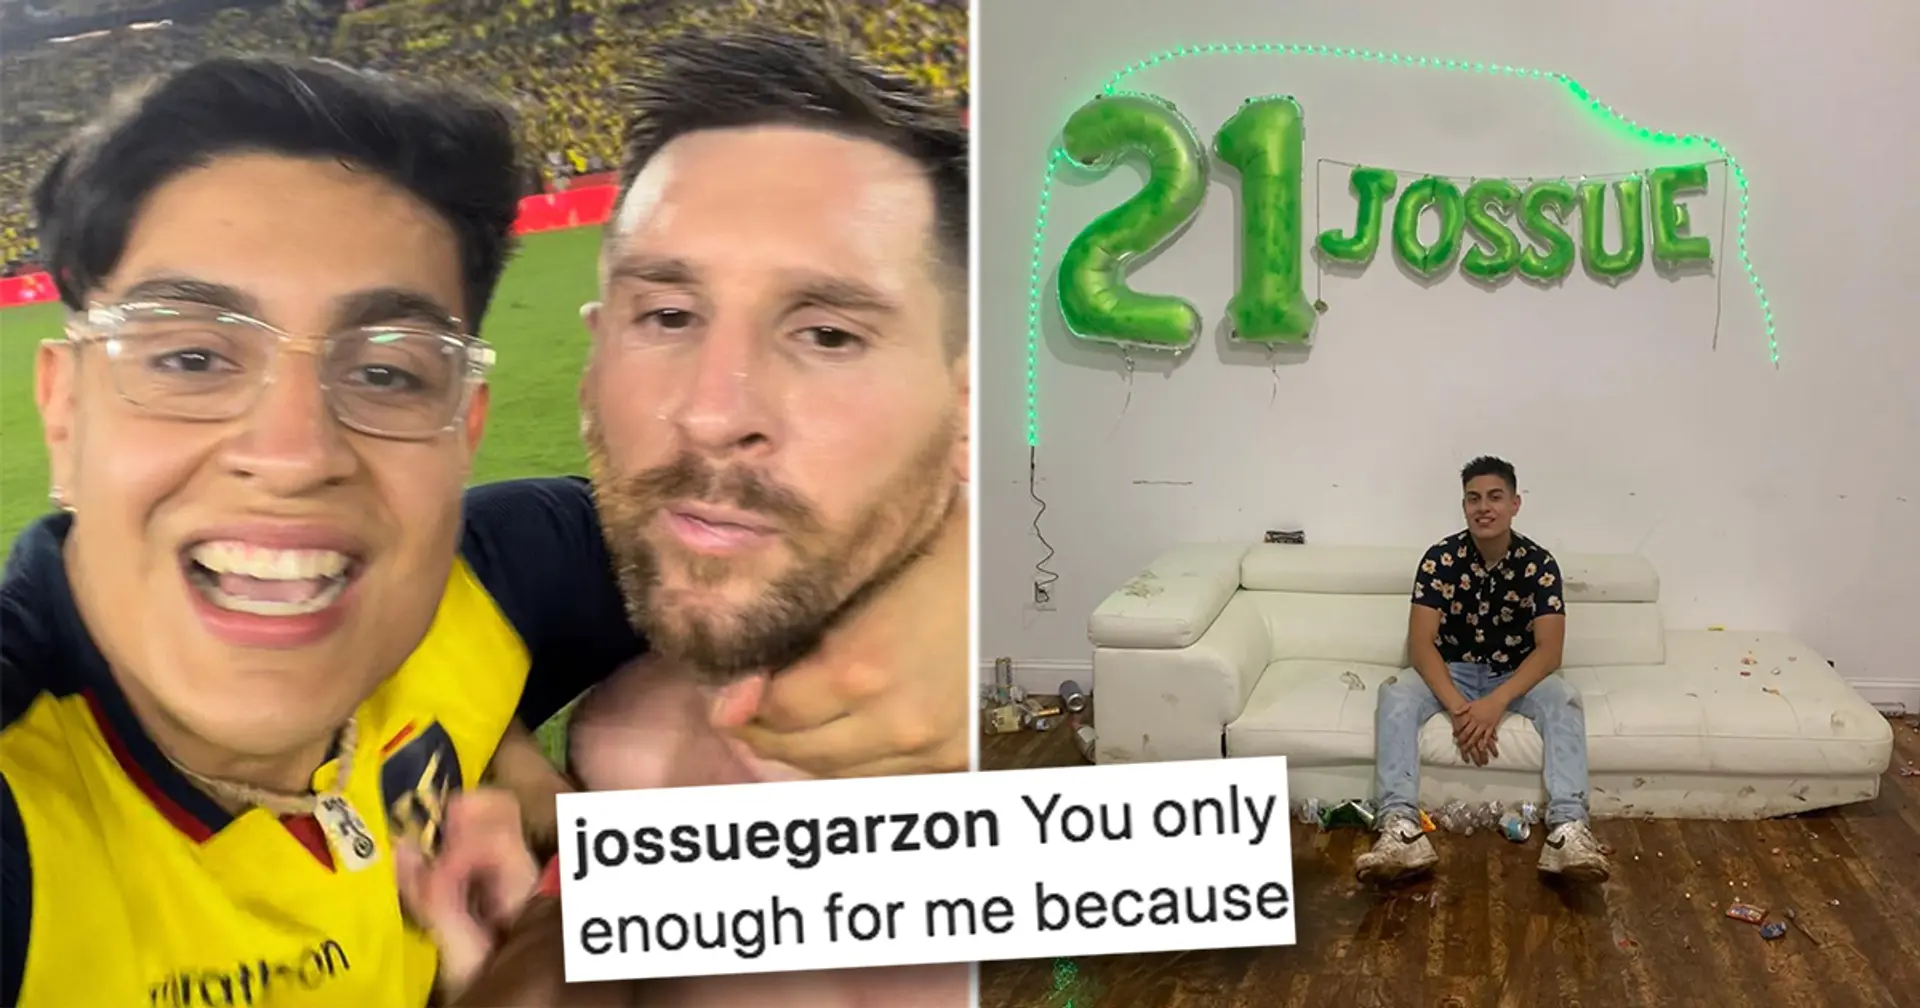 'One only lives once and once is enough for me': Ecuador fan sends message to Messi after pitch invasion